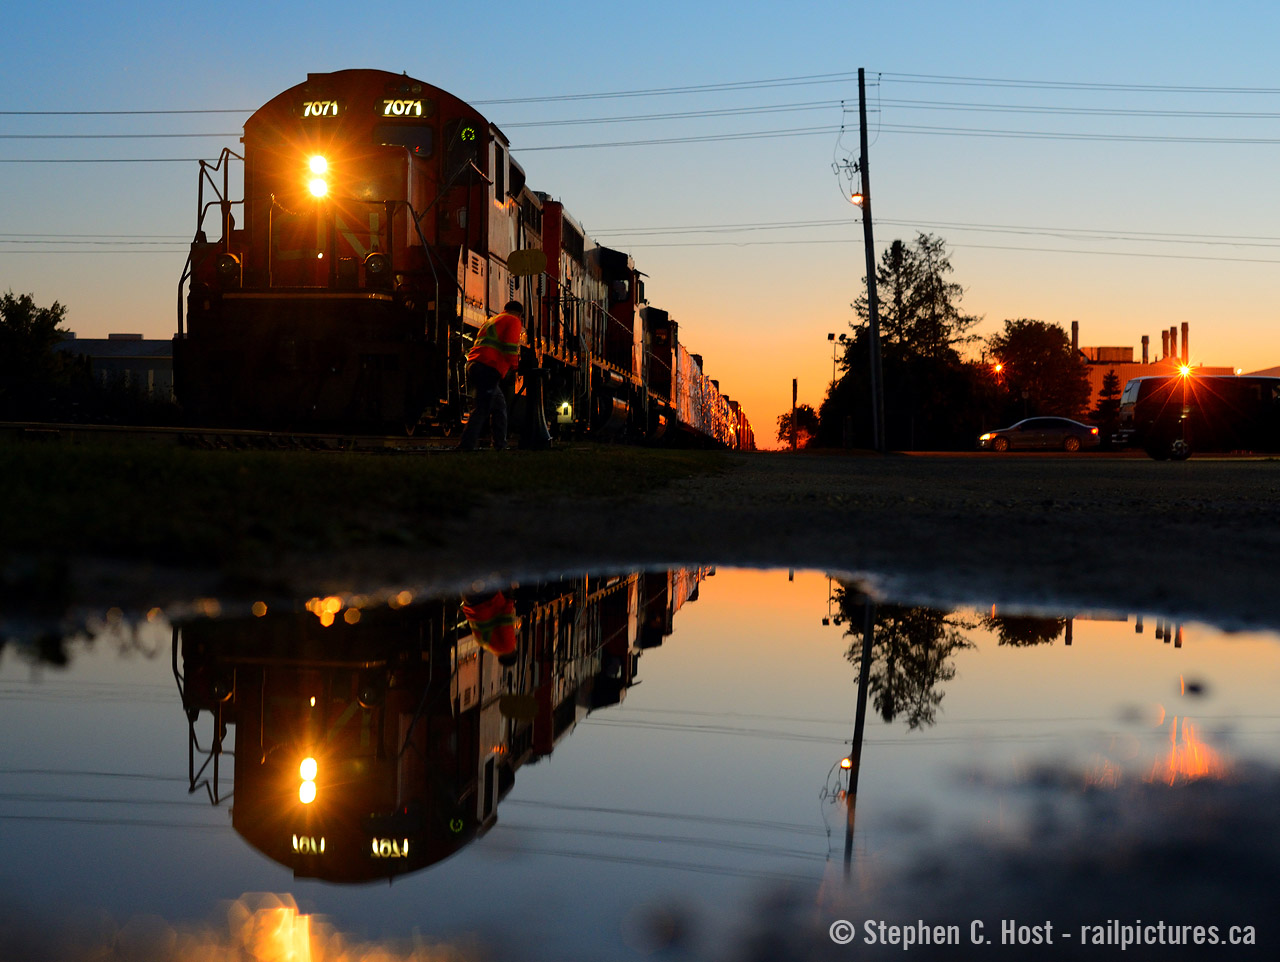 Sailor's delight is predicted by the glowing orange sky, battle hardened GP9 7071 is reflected in a small puddle as the Conductor throws a switch to turn south and head home. Leaving the Guelph Junction railway, this weekend extra will head south on the old Fergus sub then turn west following the orange glow home for the night to Kitchener. 

Note to snake: my family was at *WAL MART* nearby and I chanced on the train that evening :) Guess what they were buying???